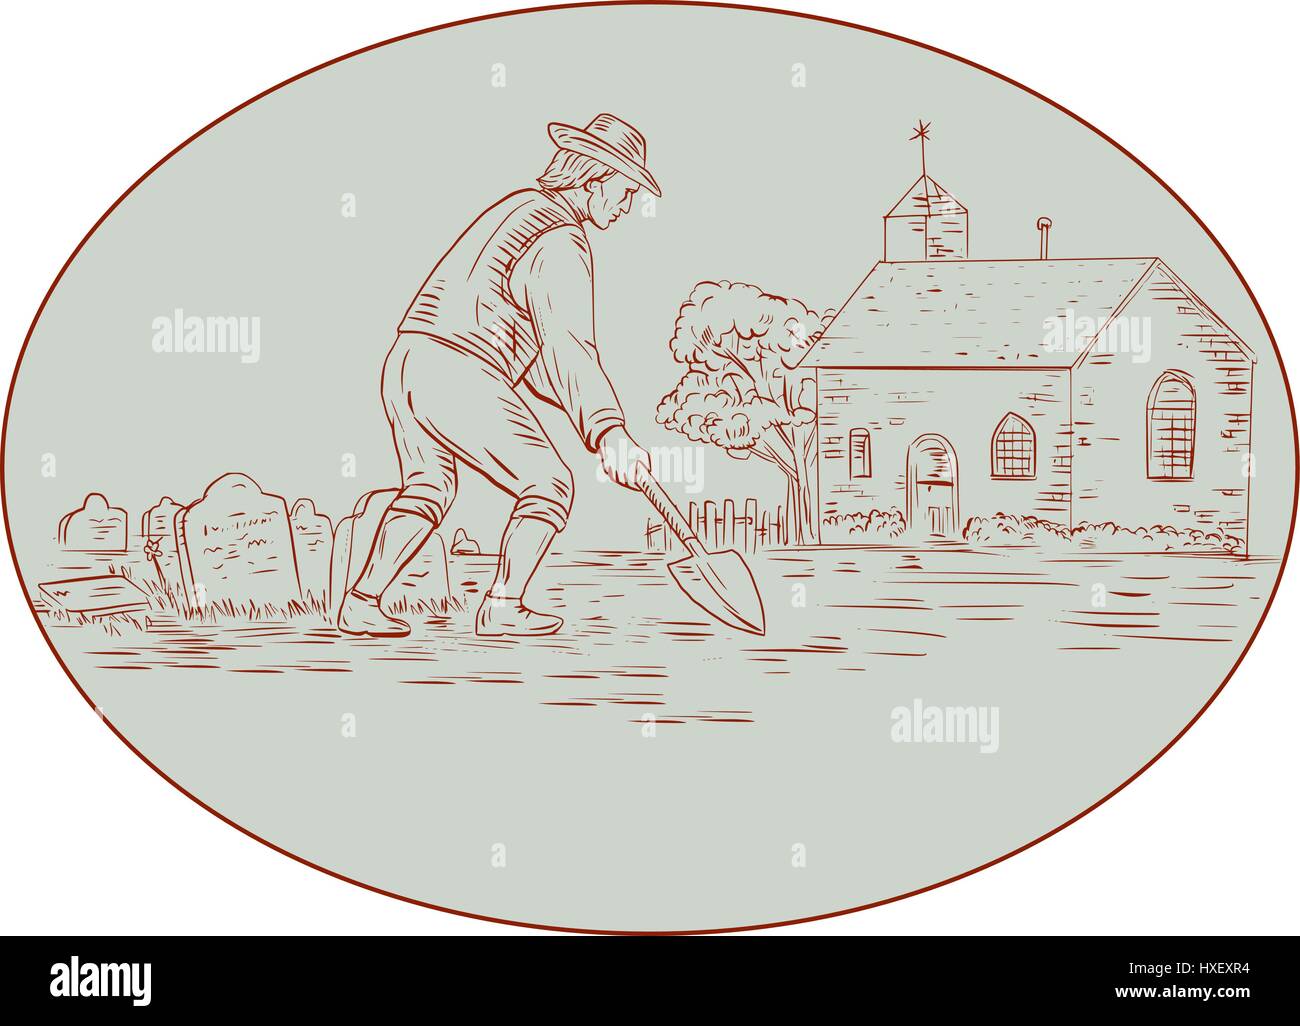 Drawing sketch style illustration of a grave digger in the medieval times holding shovel digging viewed from the side set inside oval shape with churc Stock Vector